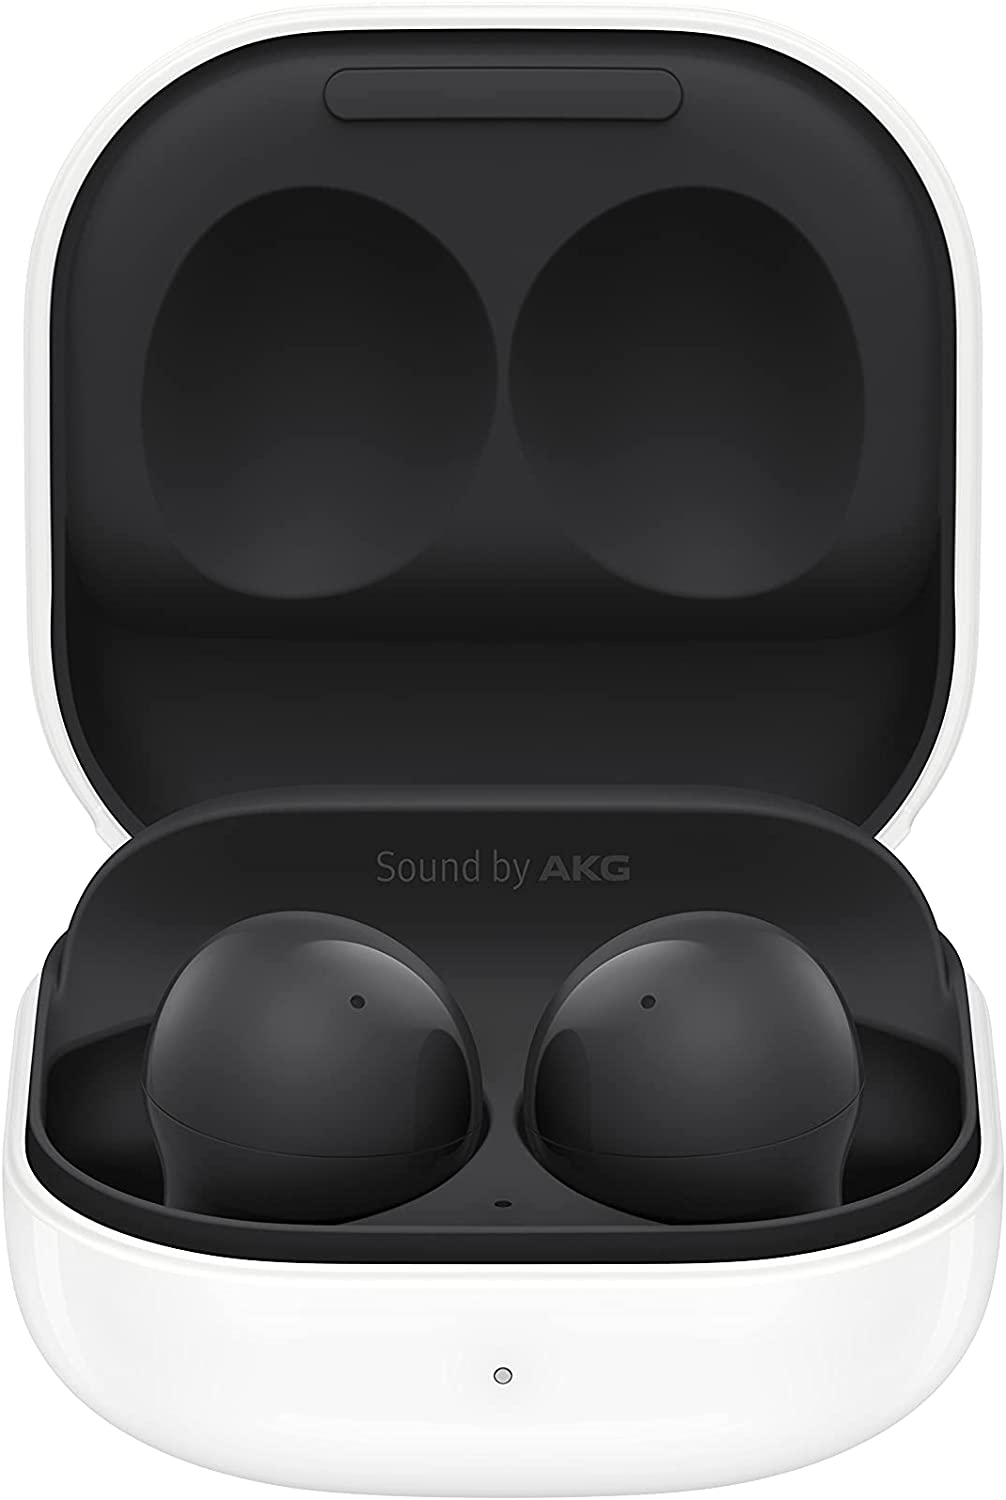 Samsung Galaxy Buds 2 True Wireless Noise Cancelling Bluetooth Earbuds -Graphite (Refurbished)